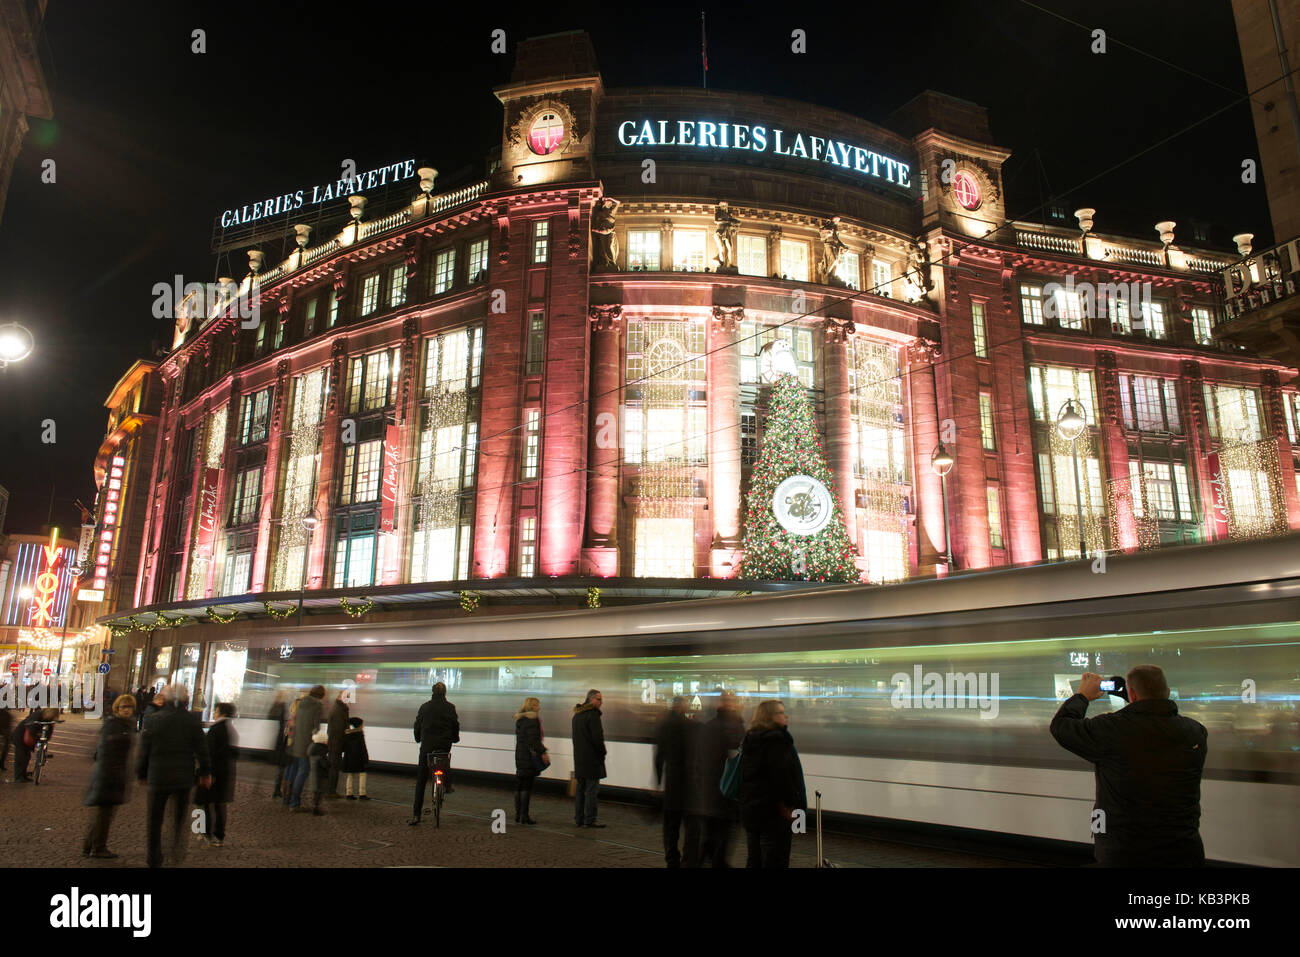 France, Bas Rhin, Strasbourg, old town listed as World Heritage by UNESCO, Christmas decoration on the Galeries Lafayettes Department store, Rue du 22 Novembre and Rue des Francs Stock Photo